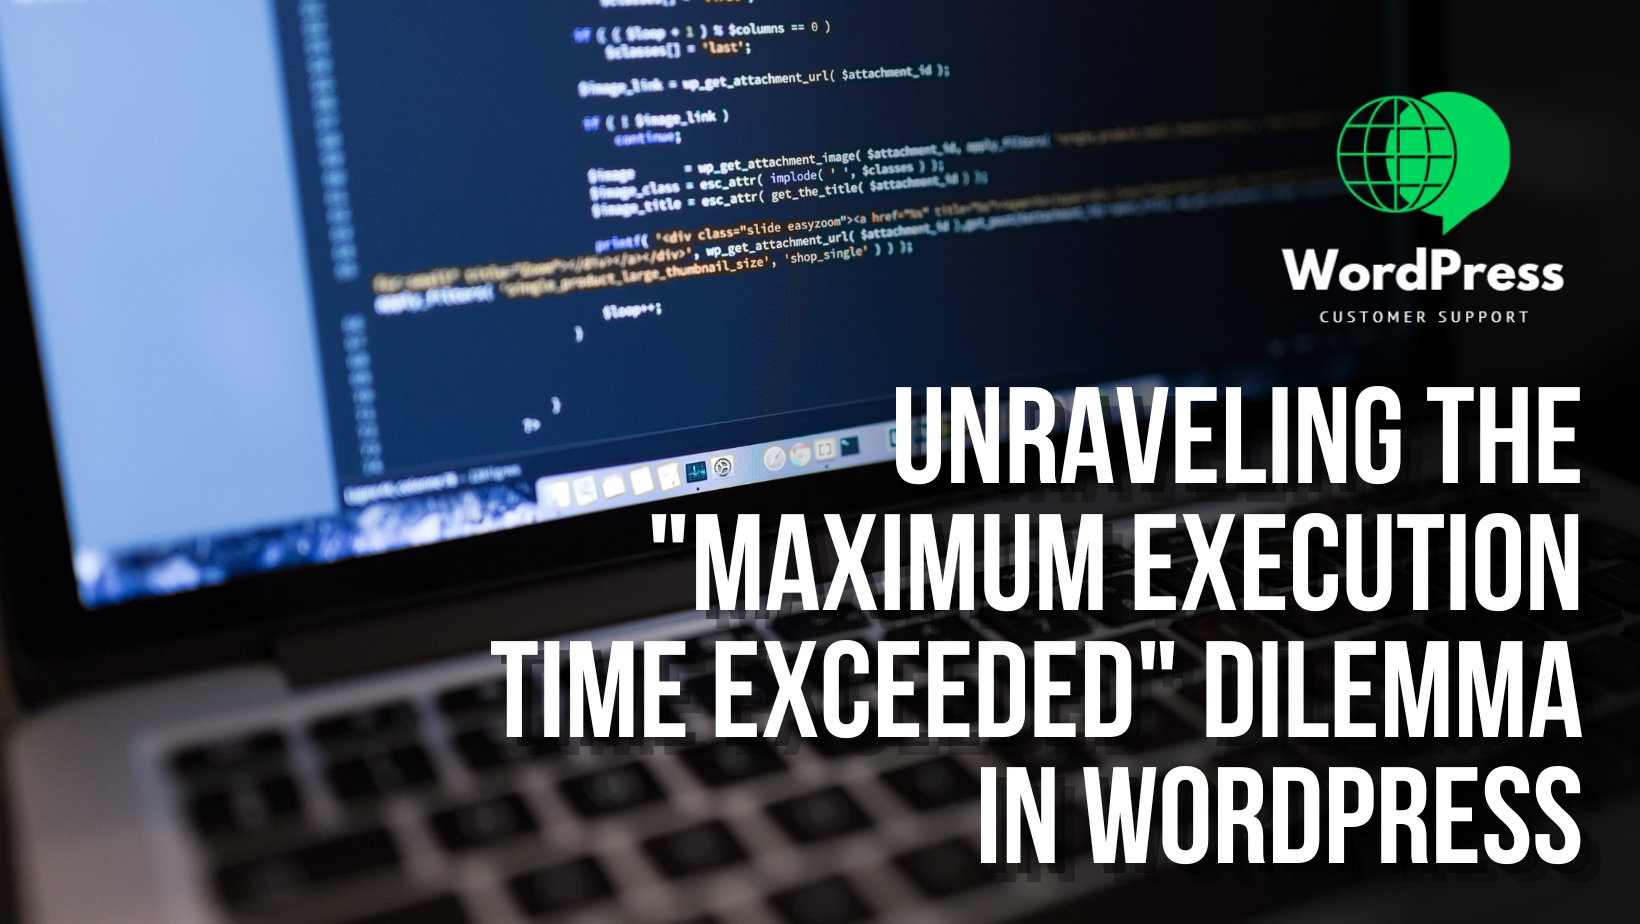 Unraveling the “Maximum Execution Time Exceeded” Dilemma in WordPress